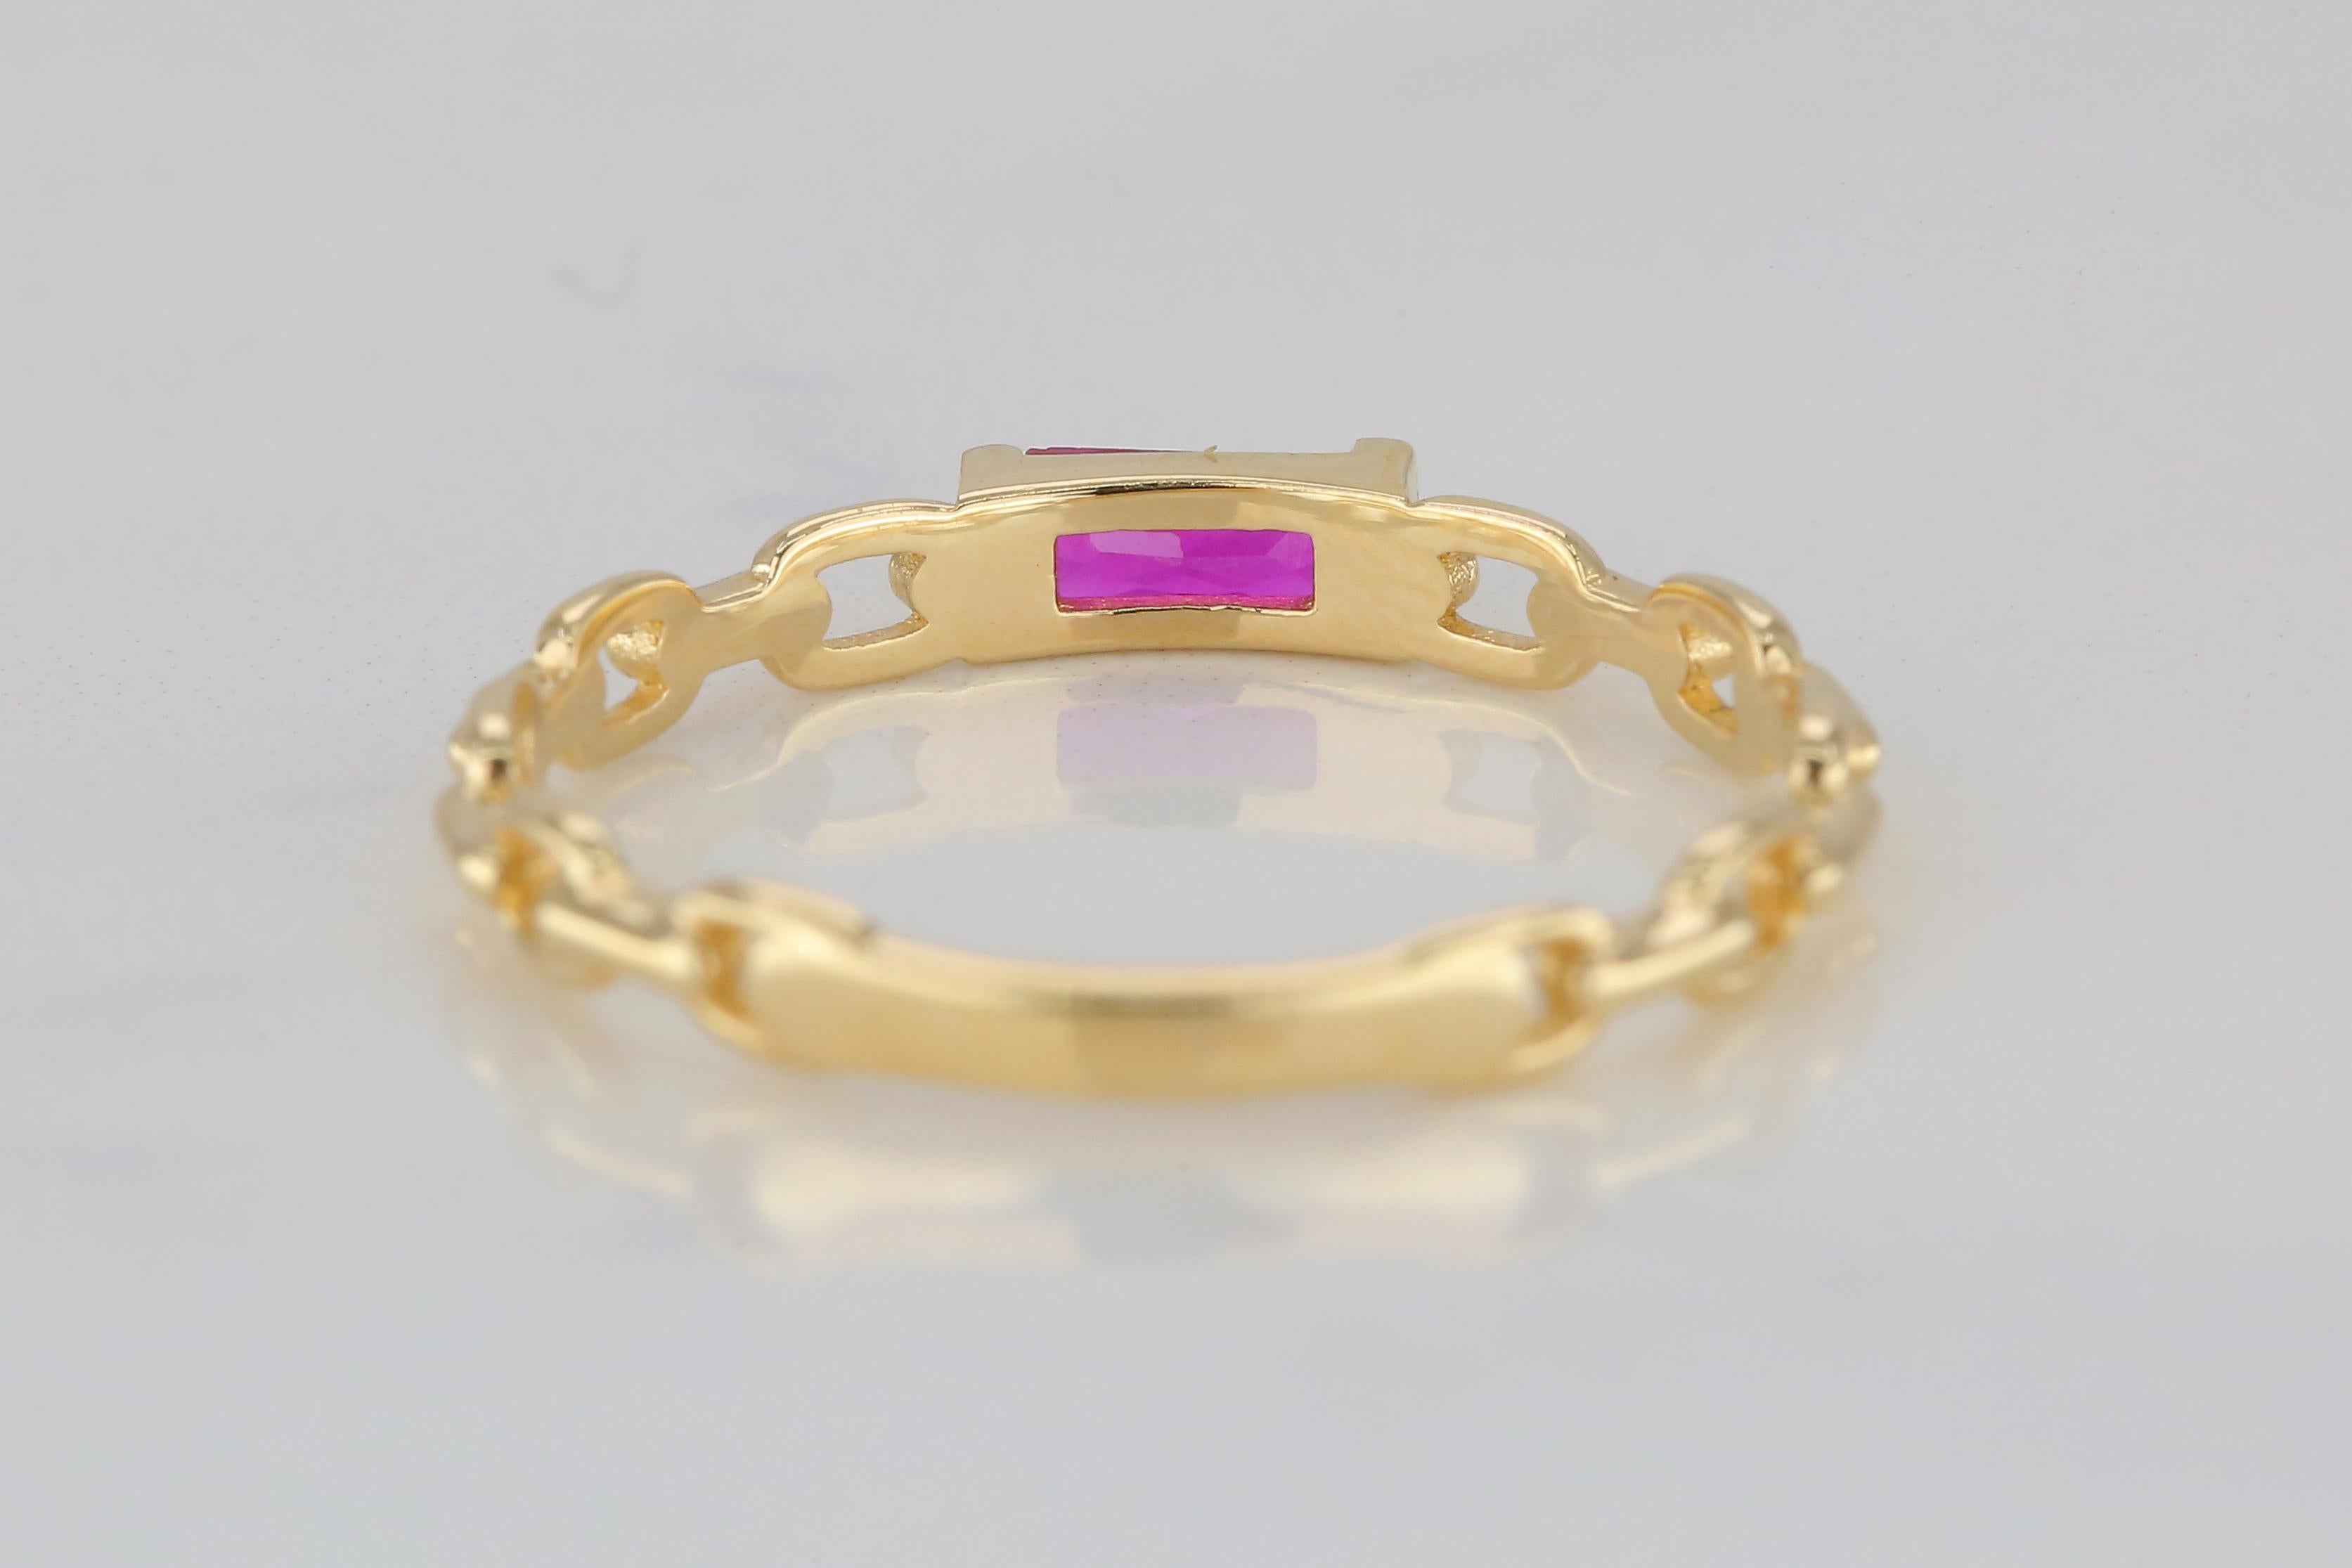 For Sale:  14 K Solid Gold Chain Link Ring -with Pink Quartz, Modern Minimal Ring 5